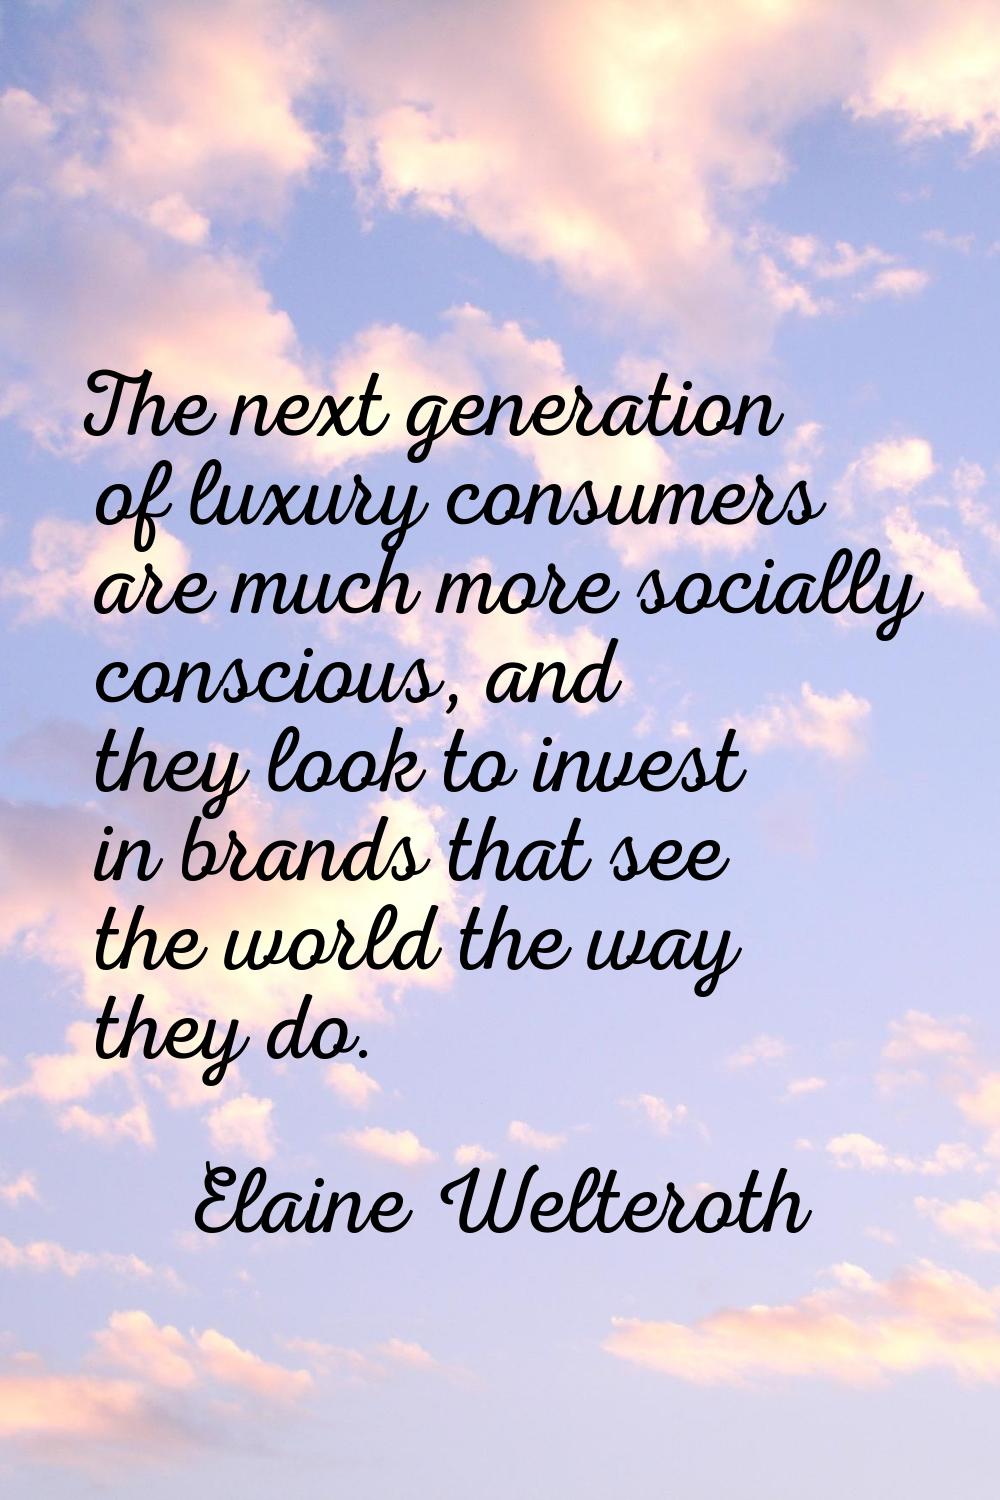 The next generation of luxury consumers are much more socially conscious, and they look to invest i